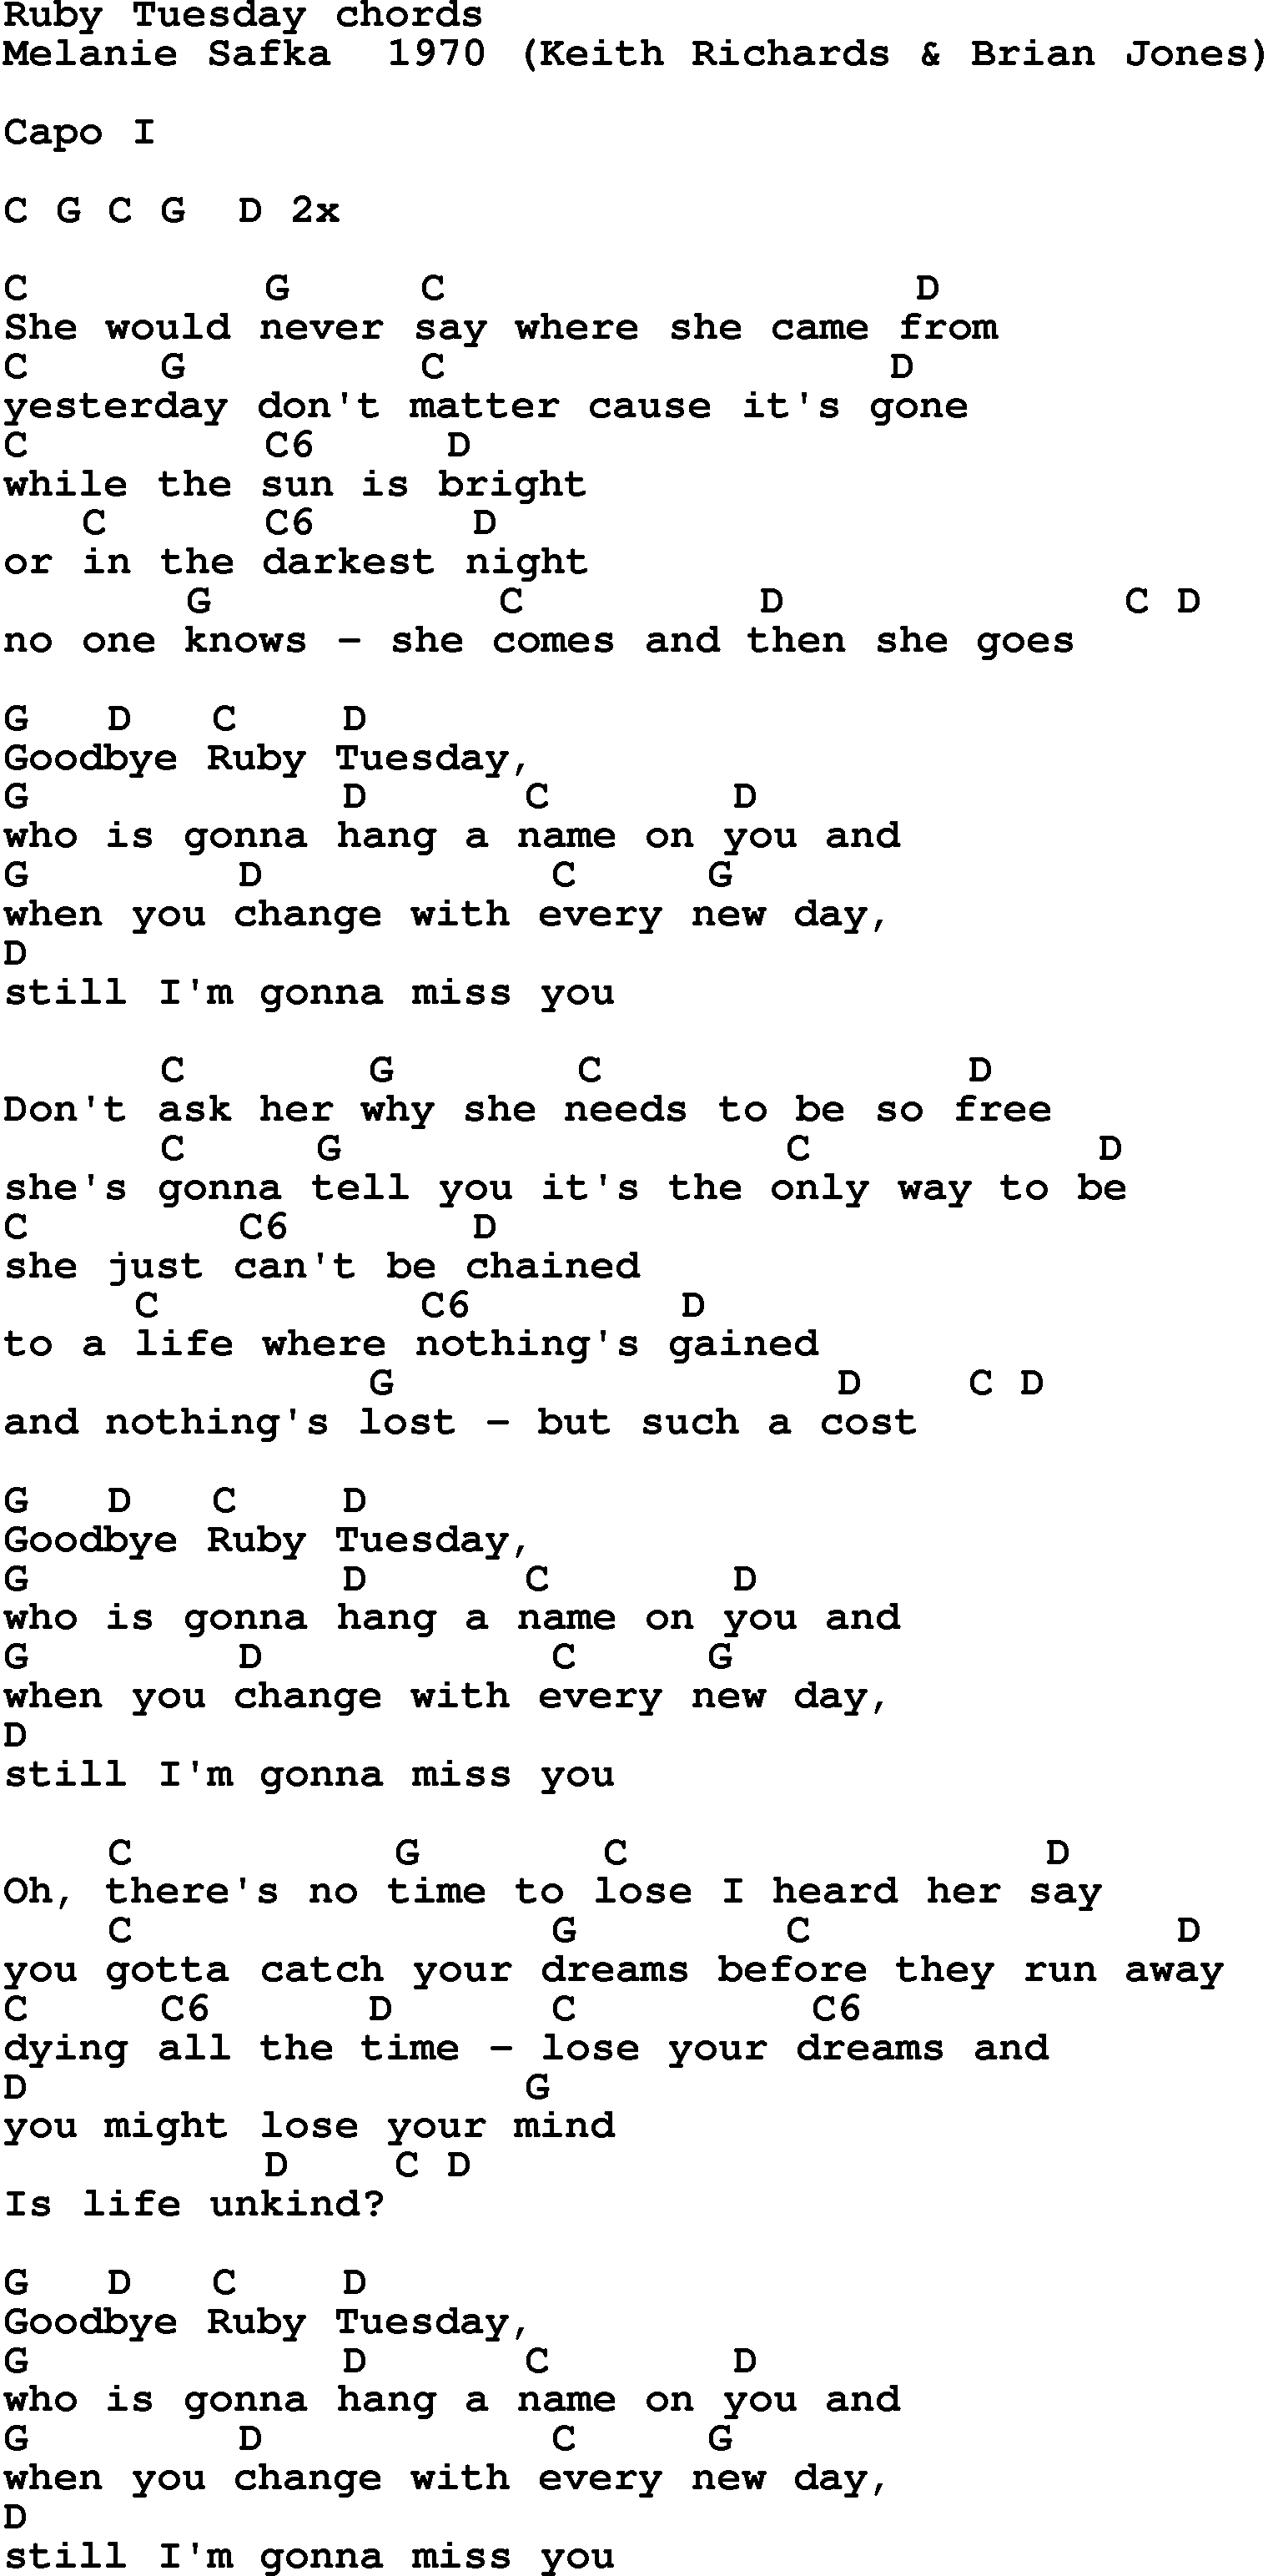 Song lyrics with guitar chords for Ruby Tuesday - The Beatles